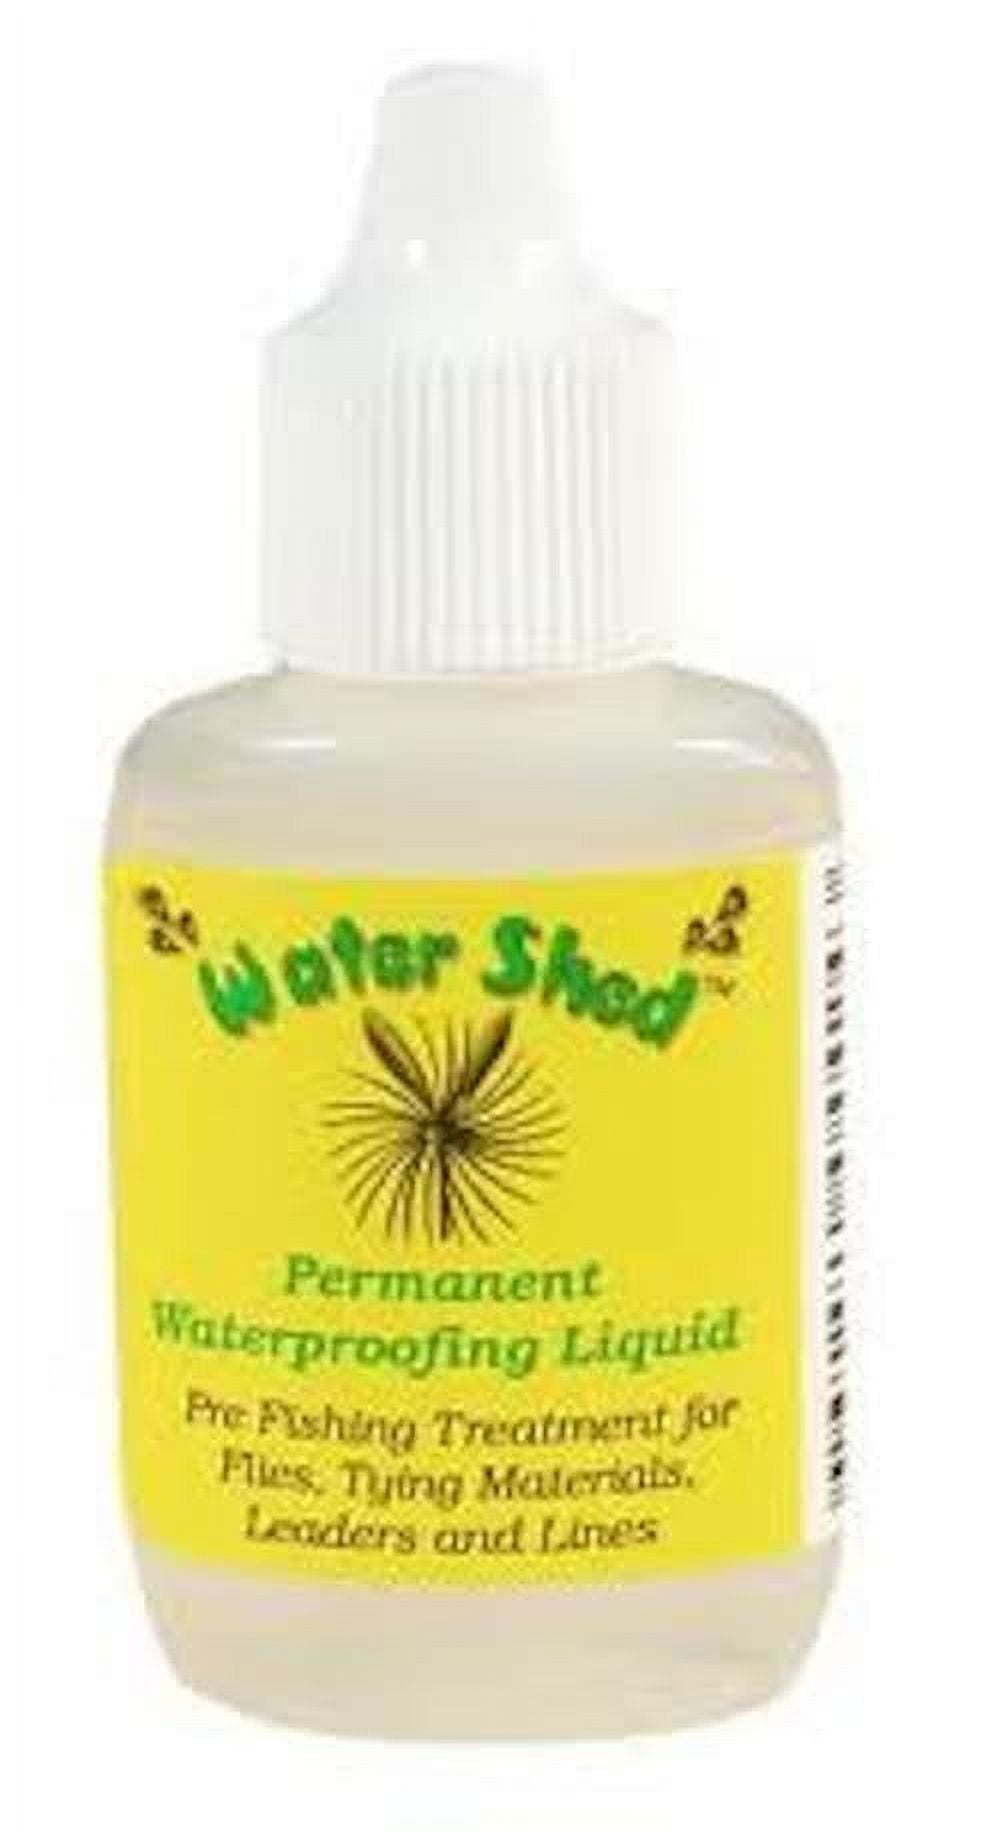 Watershed Permanent Waterproofing Liquid by Hareline - Fly Fishing 